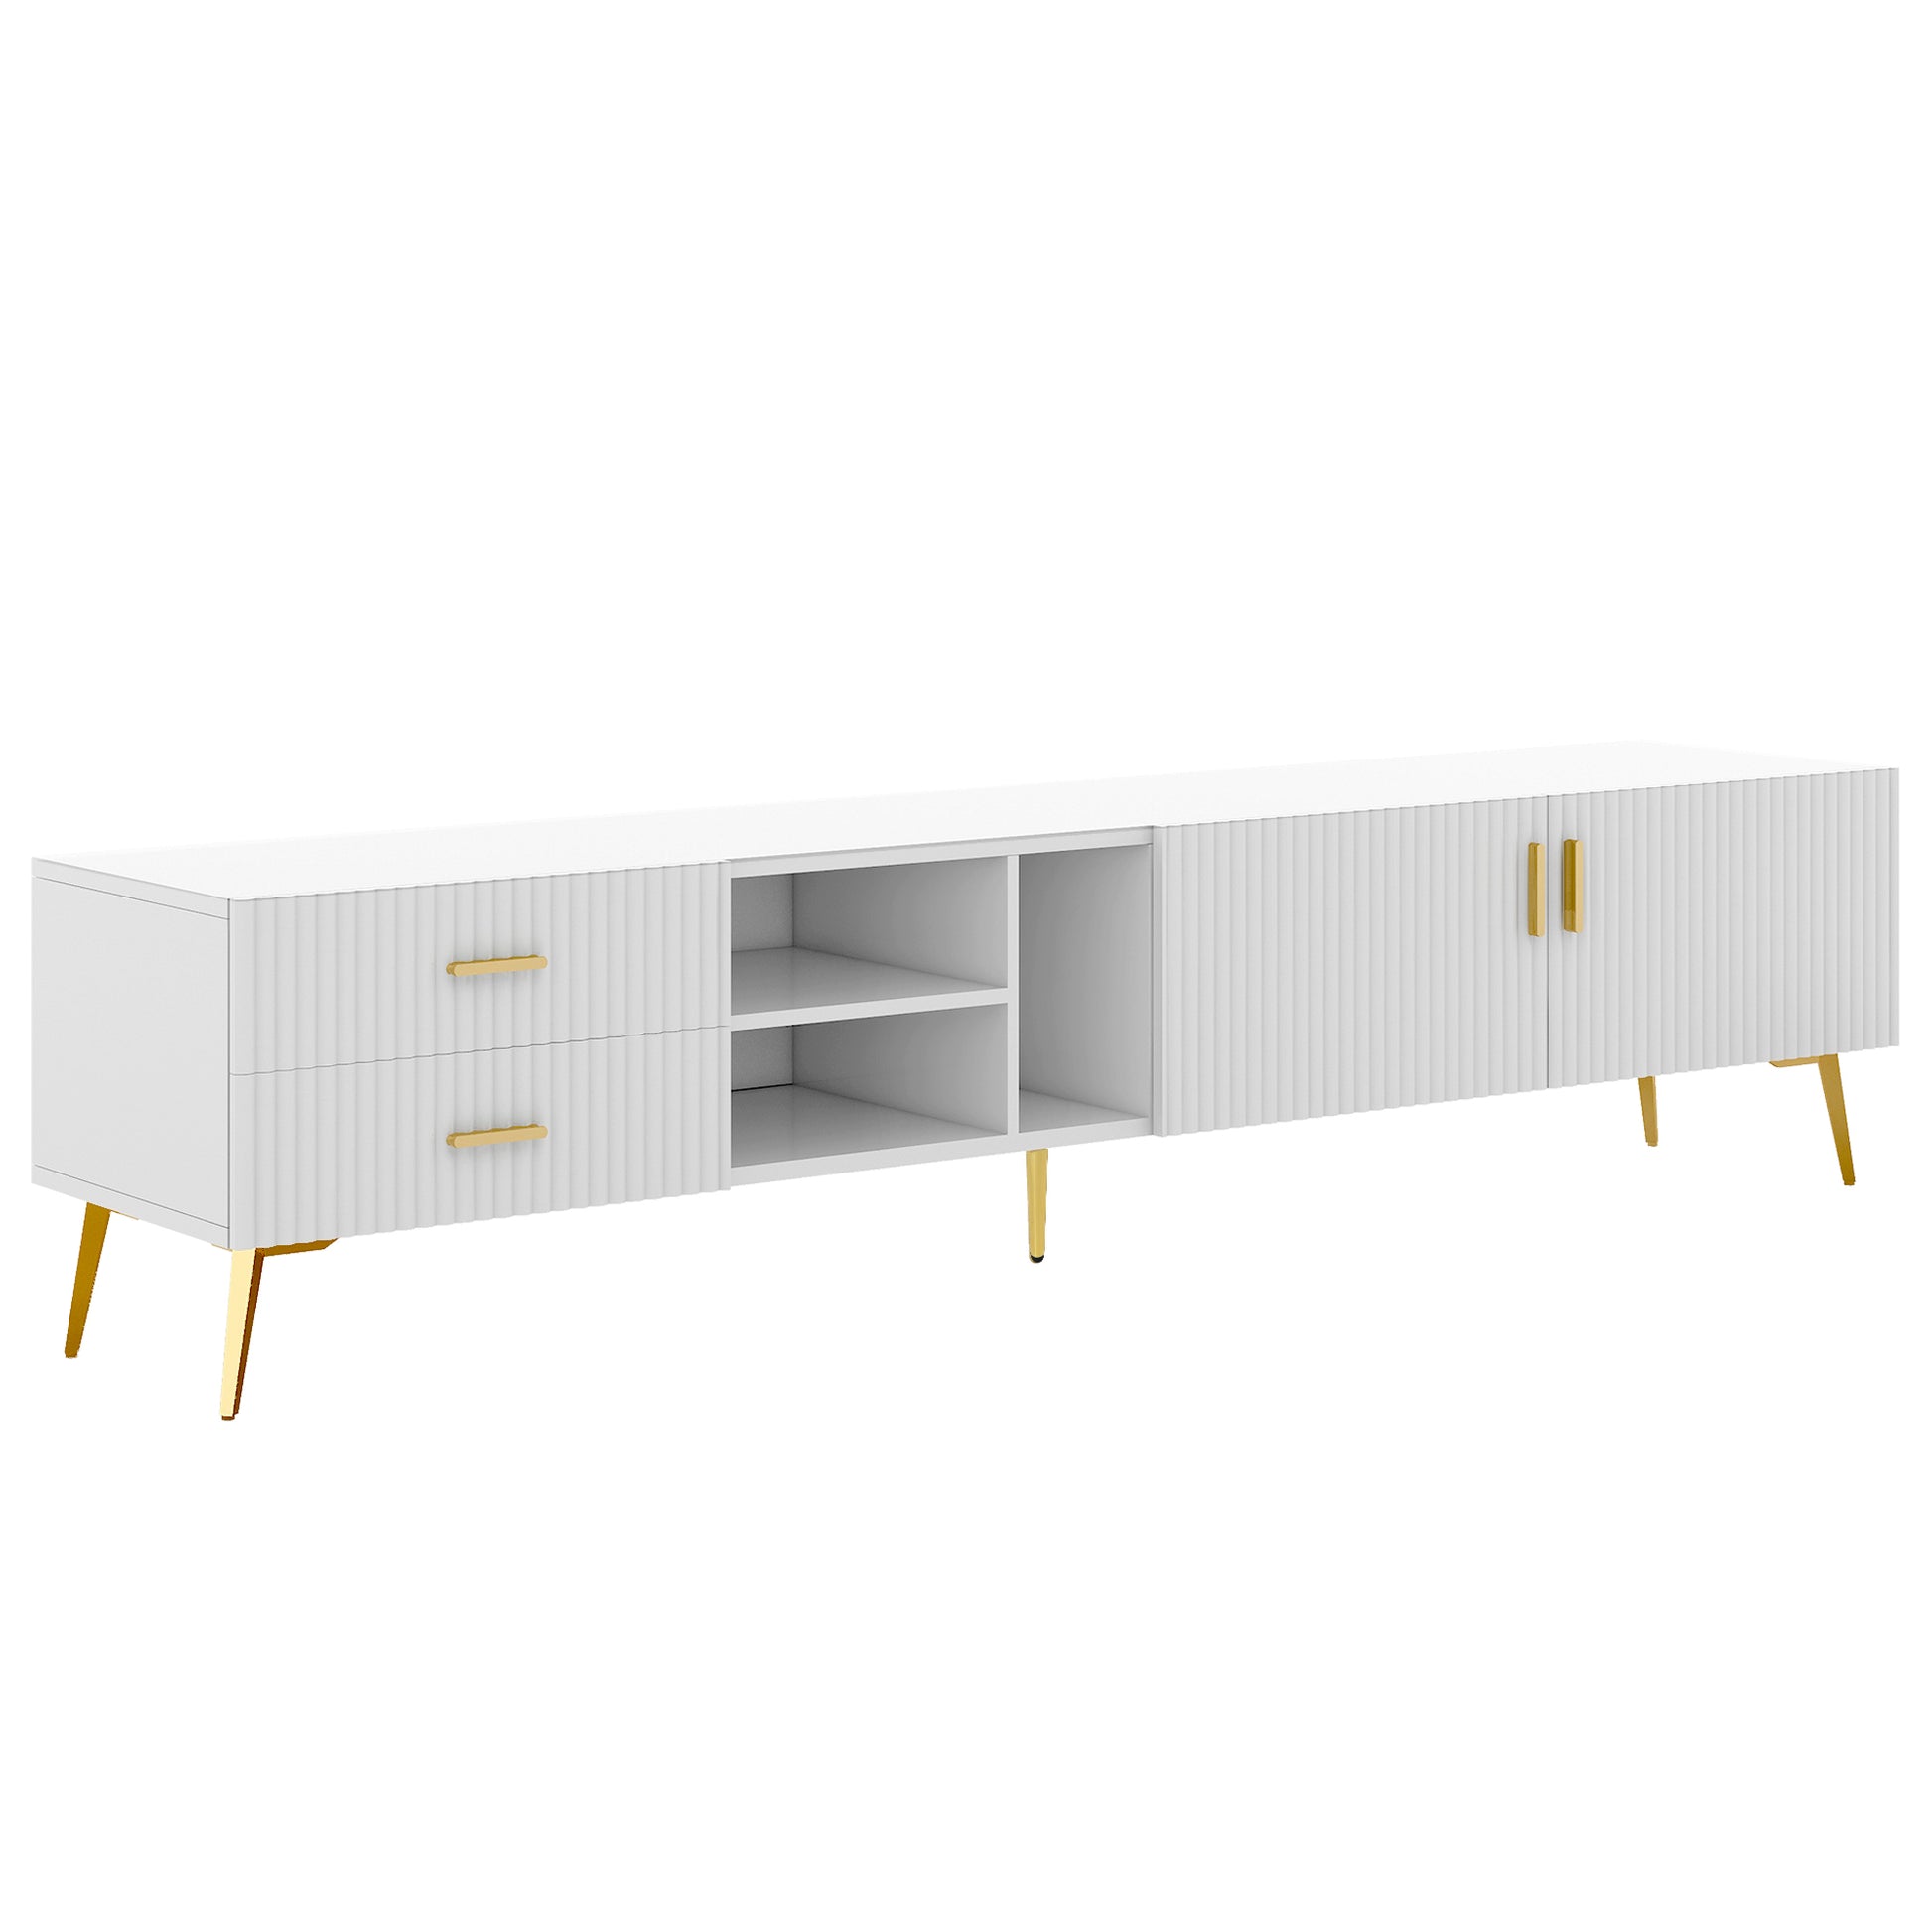 U-Can Modern TV Stand with 5 Champagne legs - Durable, stylish, spacious, versatile storage TVS up to 77" (White) - Enova Luxe Home Store